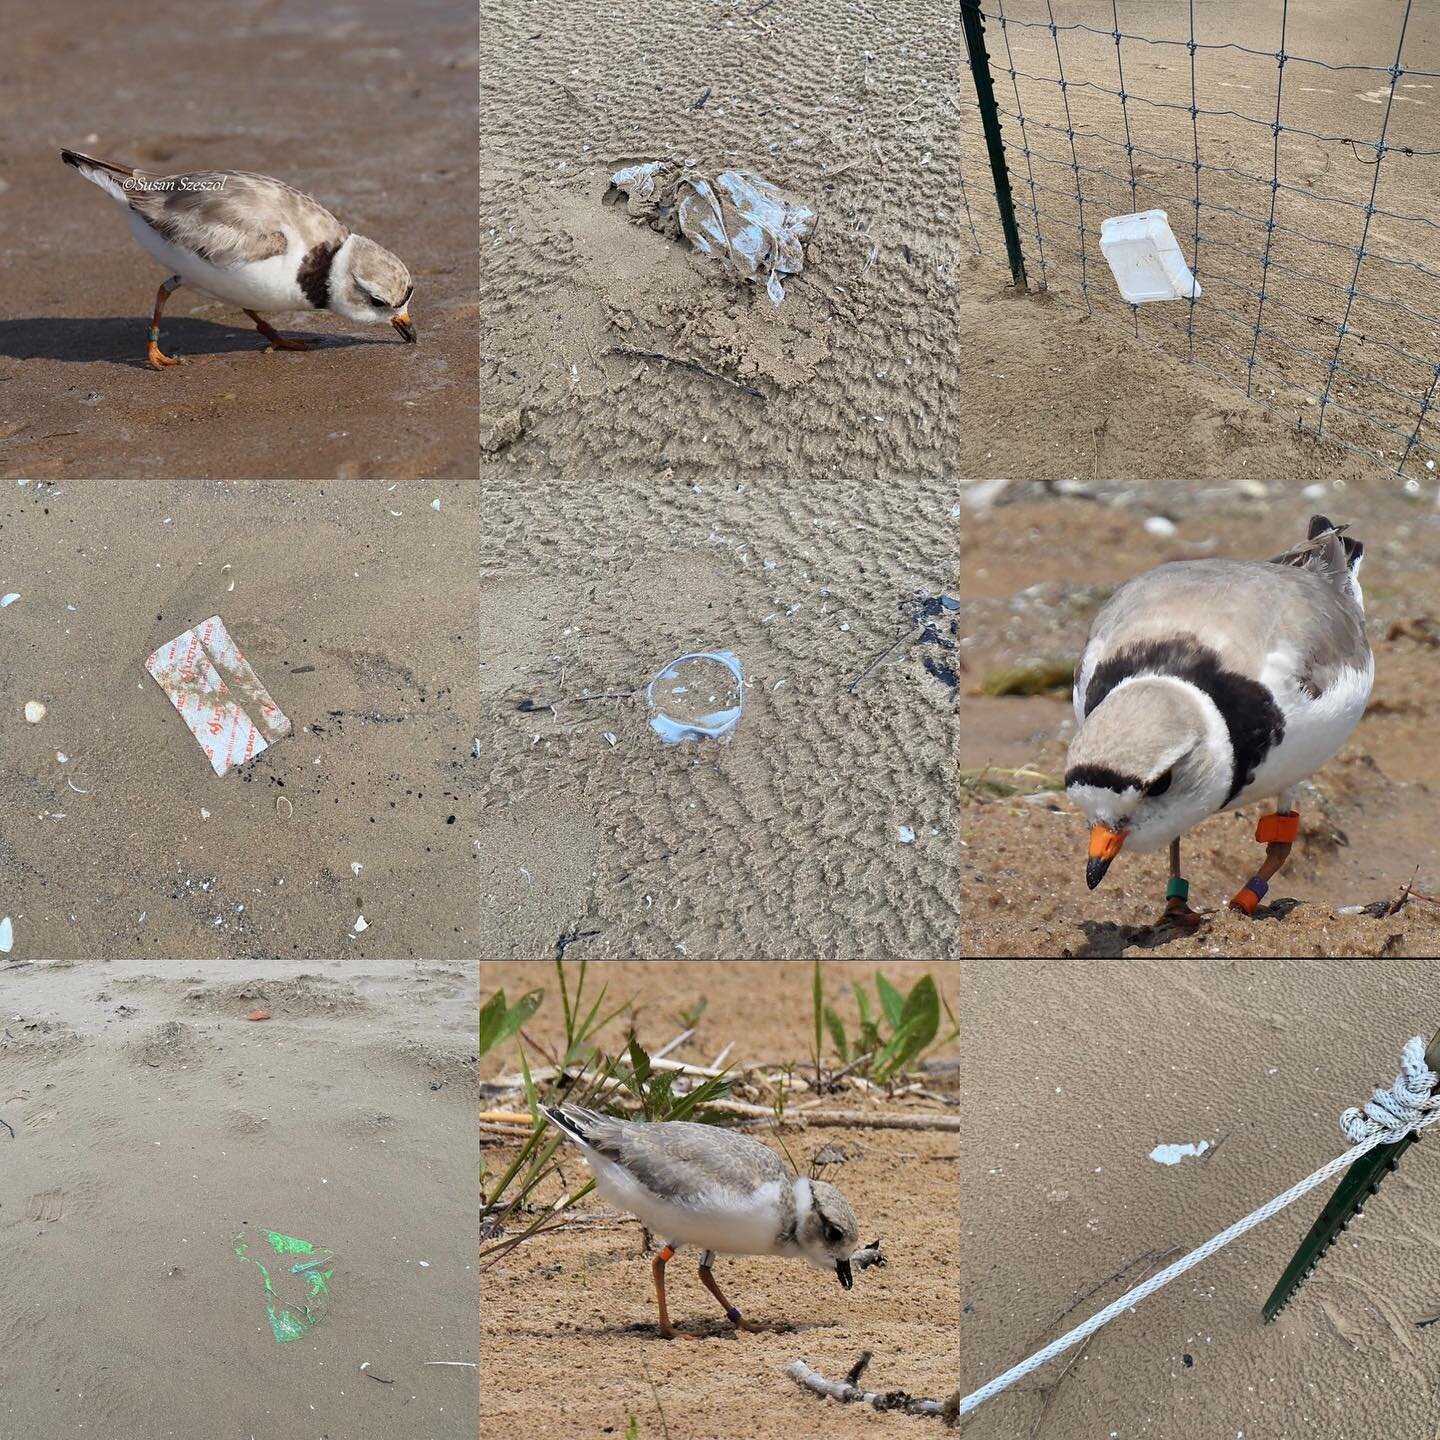 Worms with a Side of Garbage? No Thank You.
Help keep the beach clean by ensuring your garbage is properly disposed of and by removing any other waste you see that might endanger the plovers. Thank you!

Photo credits: Susan Szeszol (Rose top), Ann G